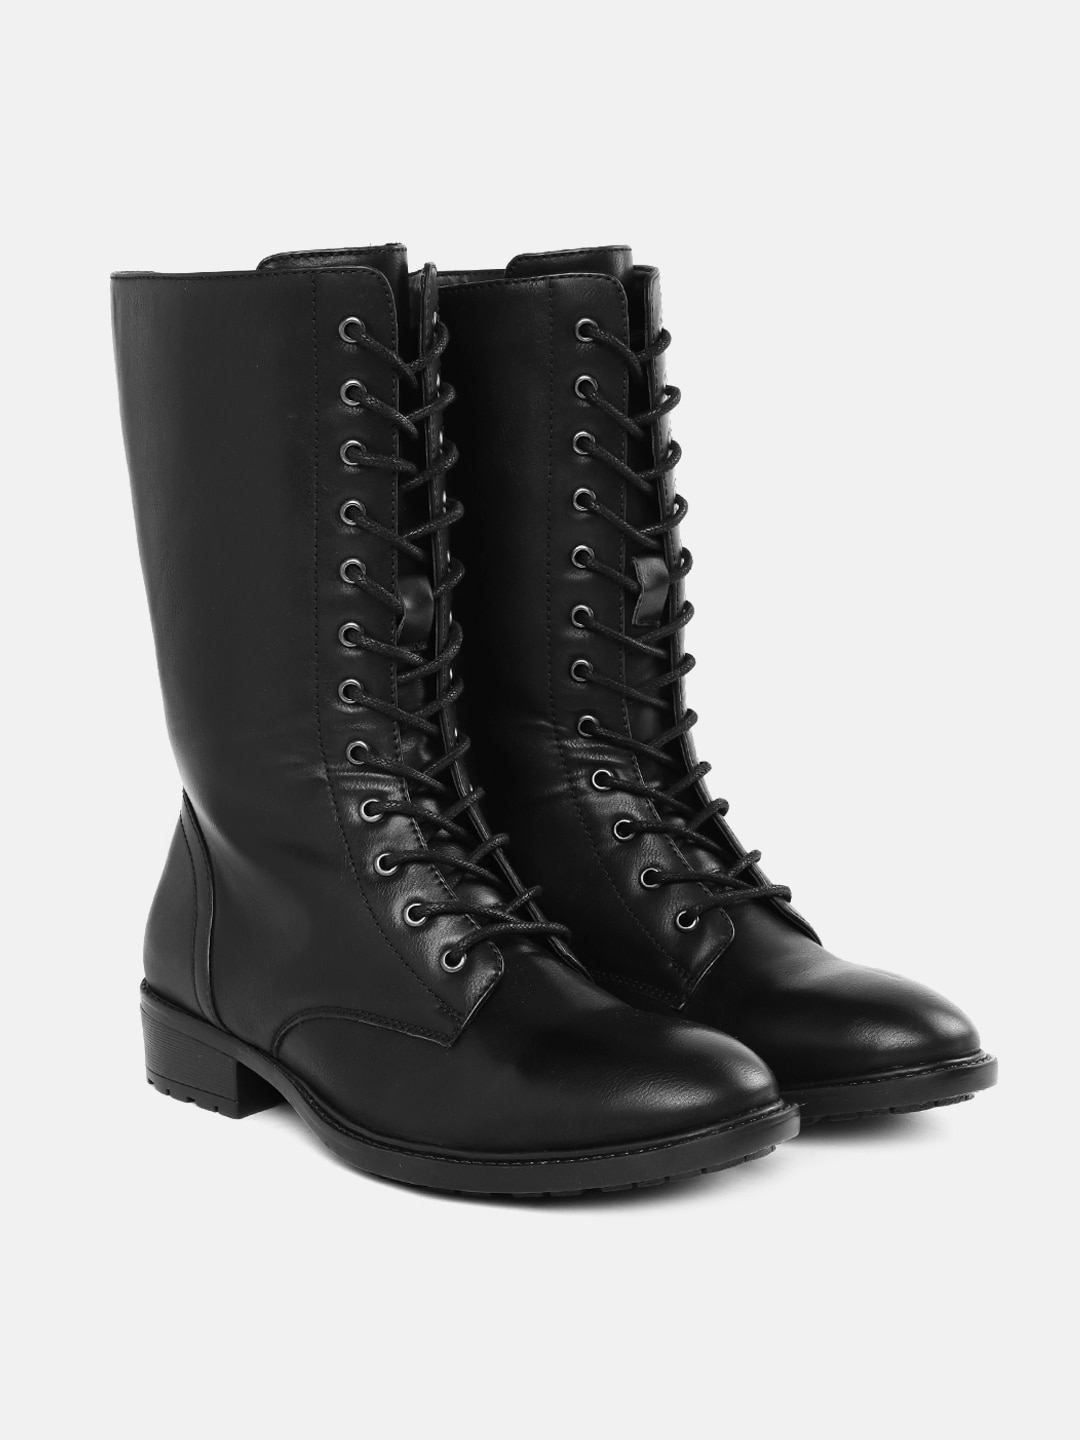 CORSICA Women Black Solid High-Top Flat Boots Price in India